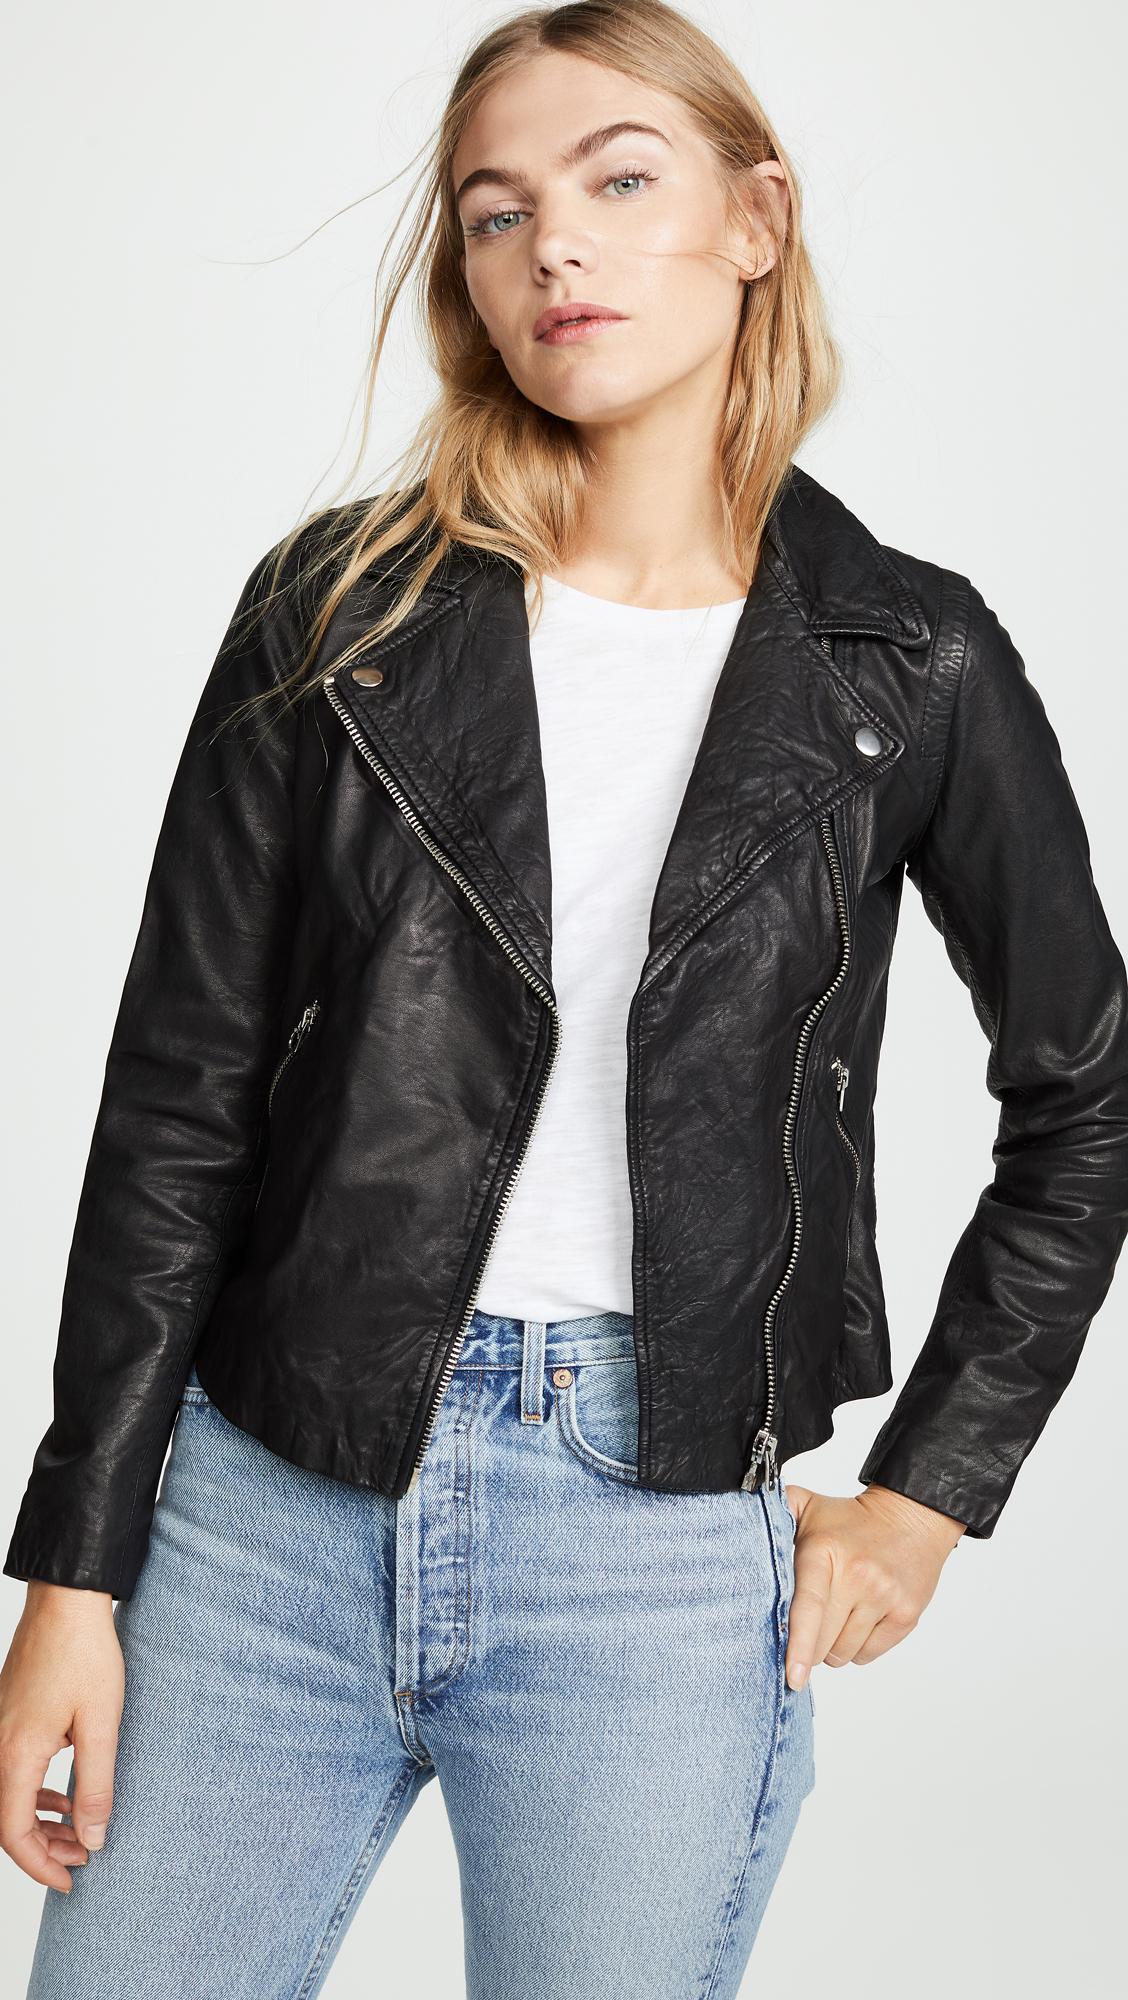 Madewell Washed Leather Motorcycle Jacket in Black - Lyst